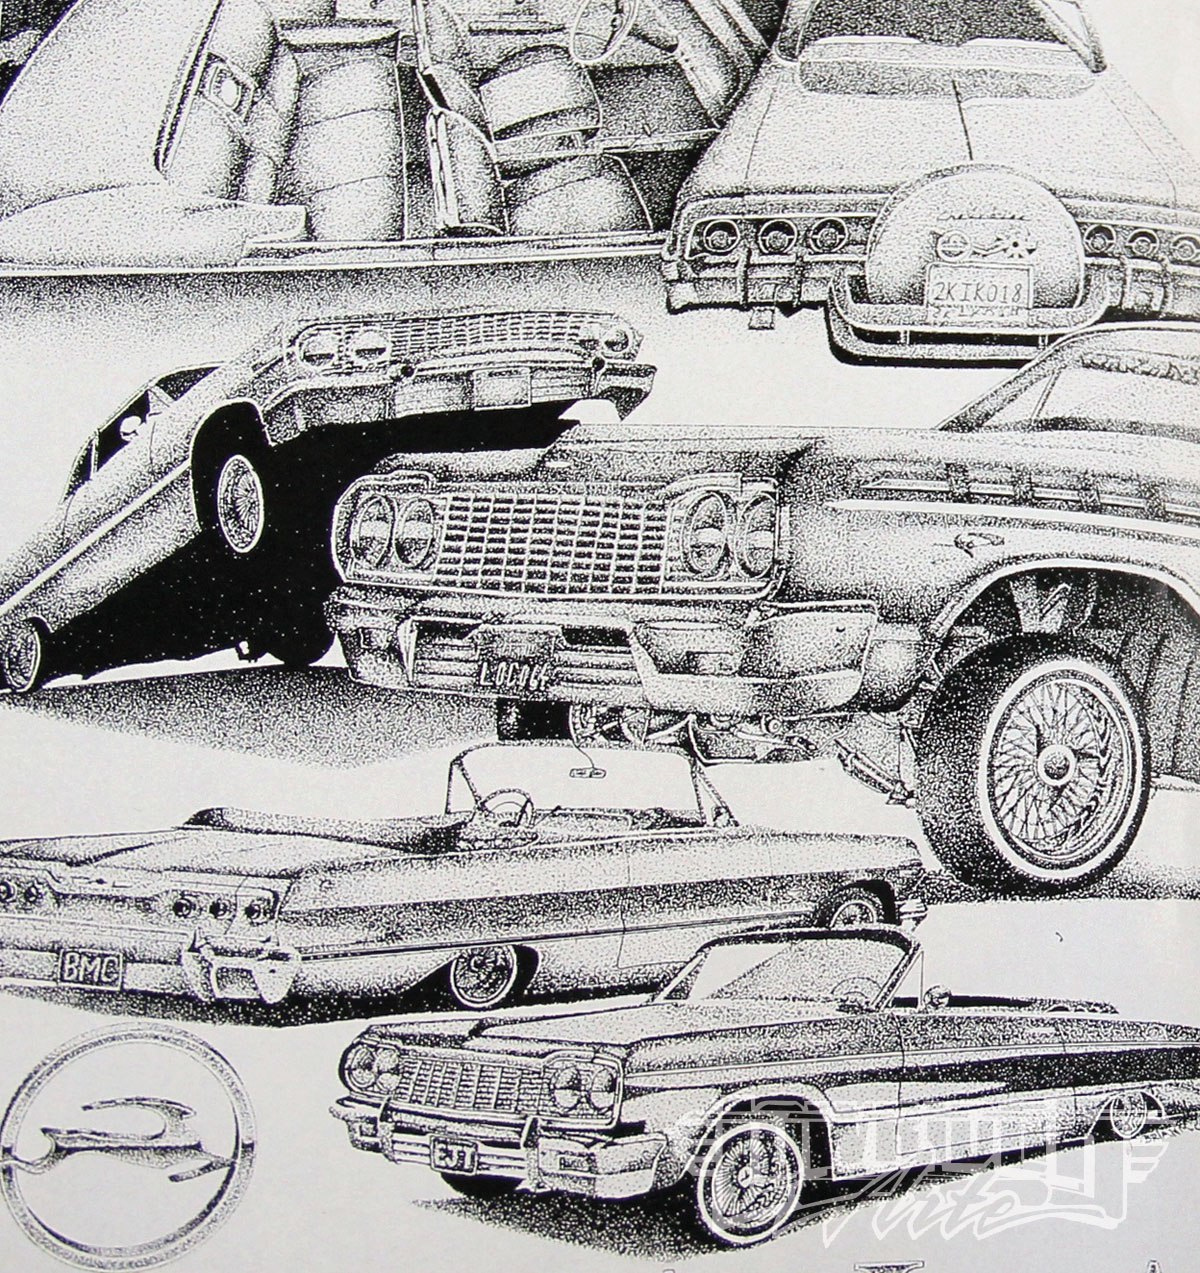 Lowrider Drawings at PaintingValley.com | Explore ...